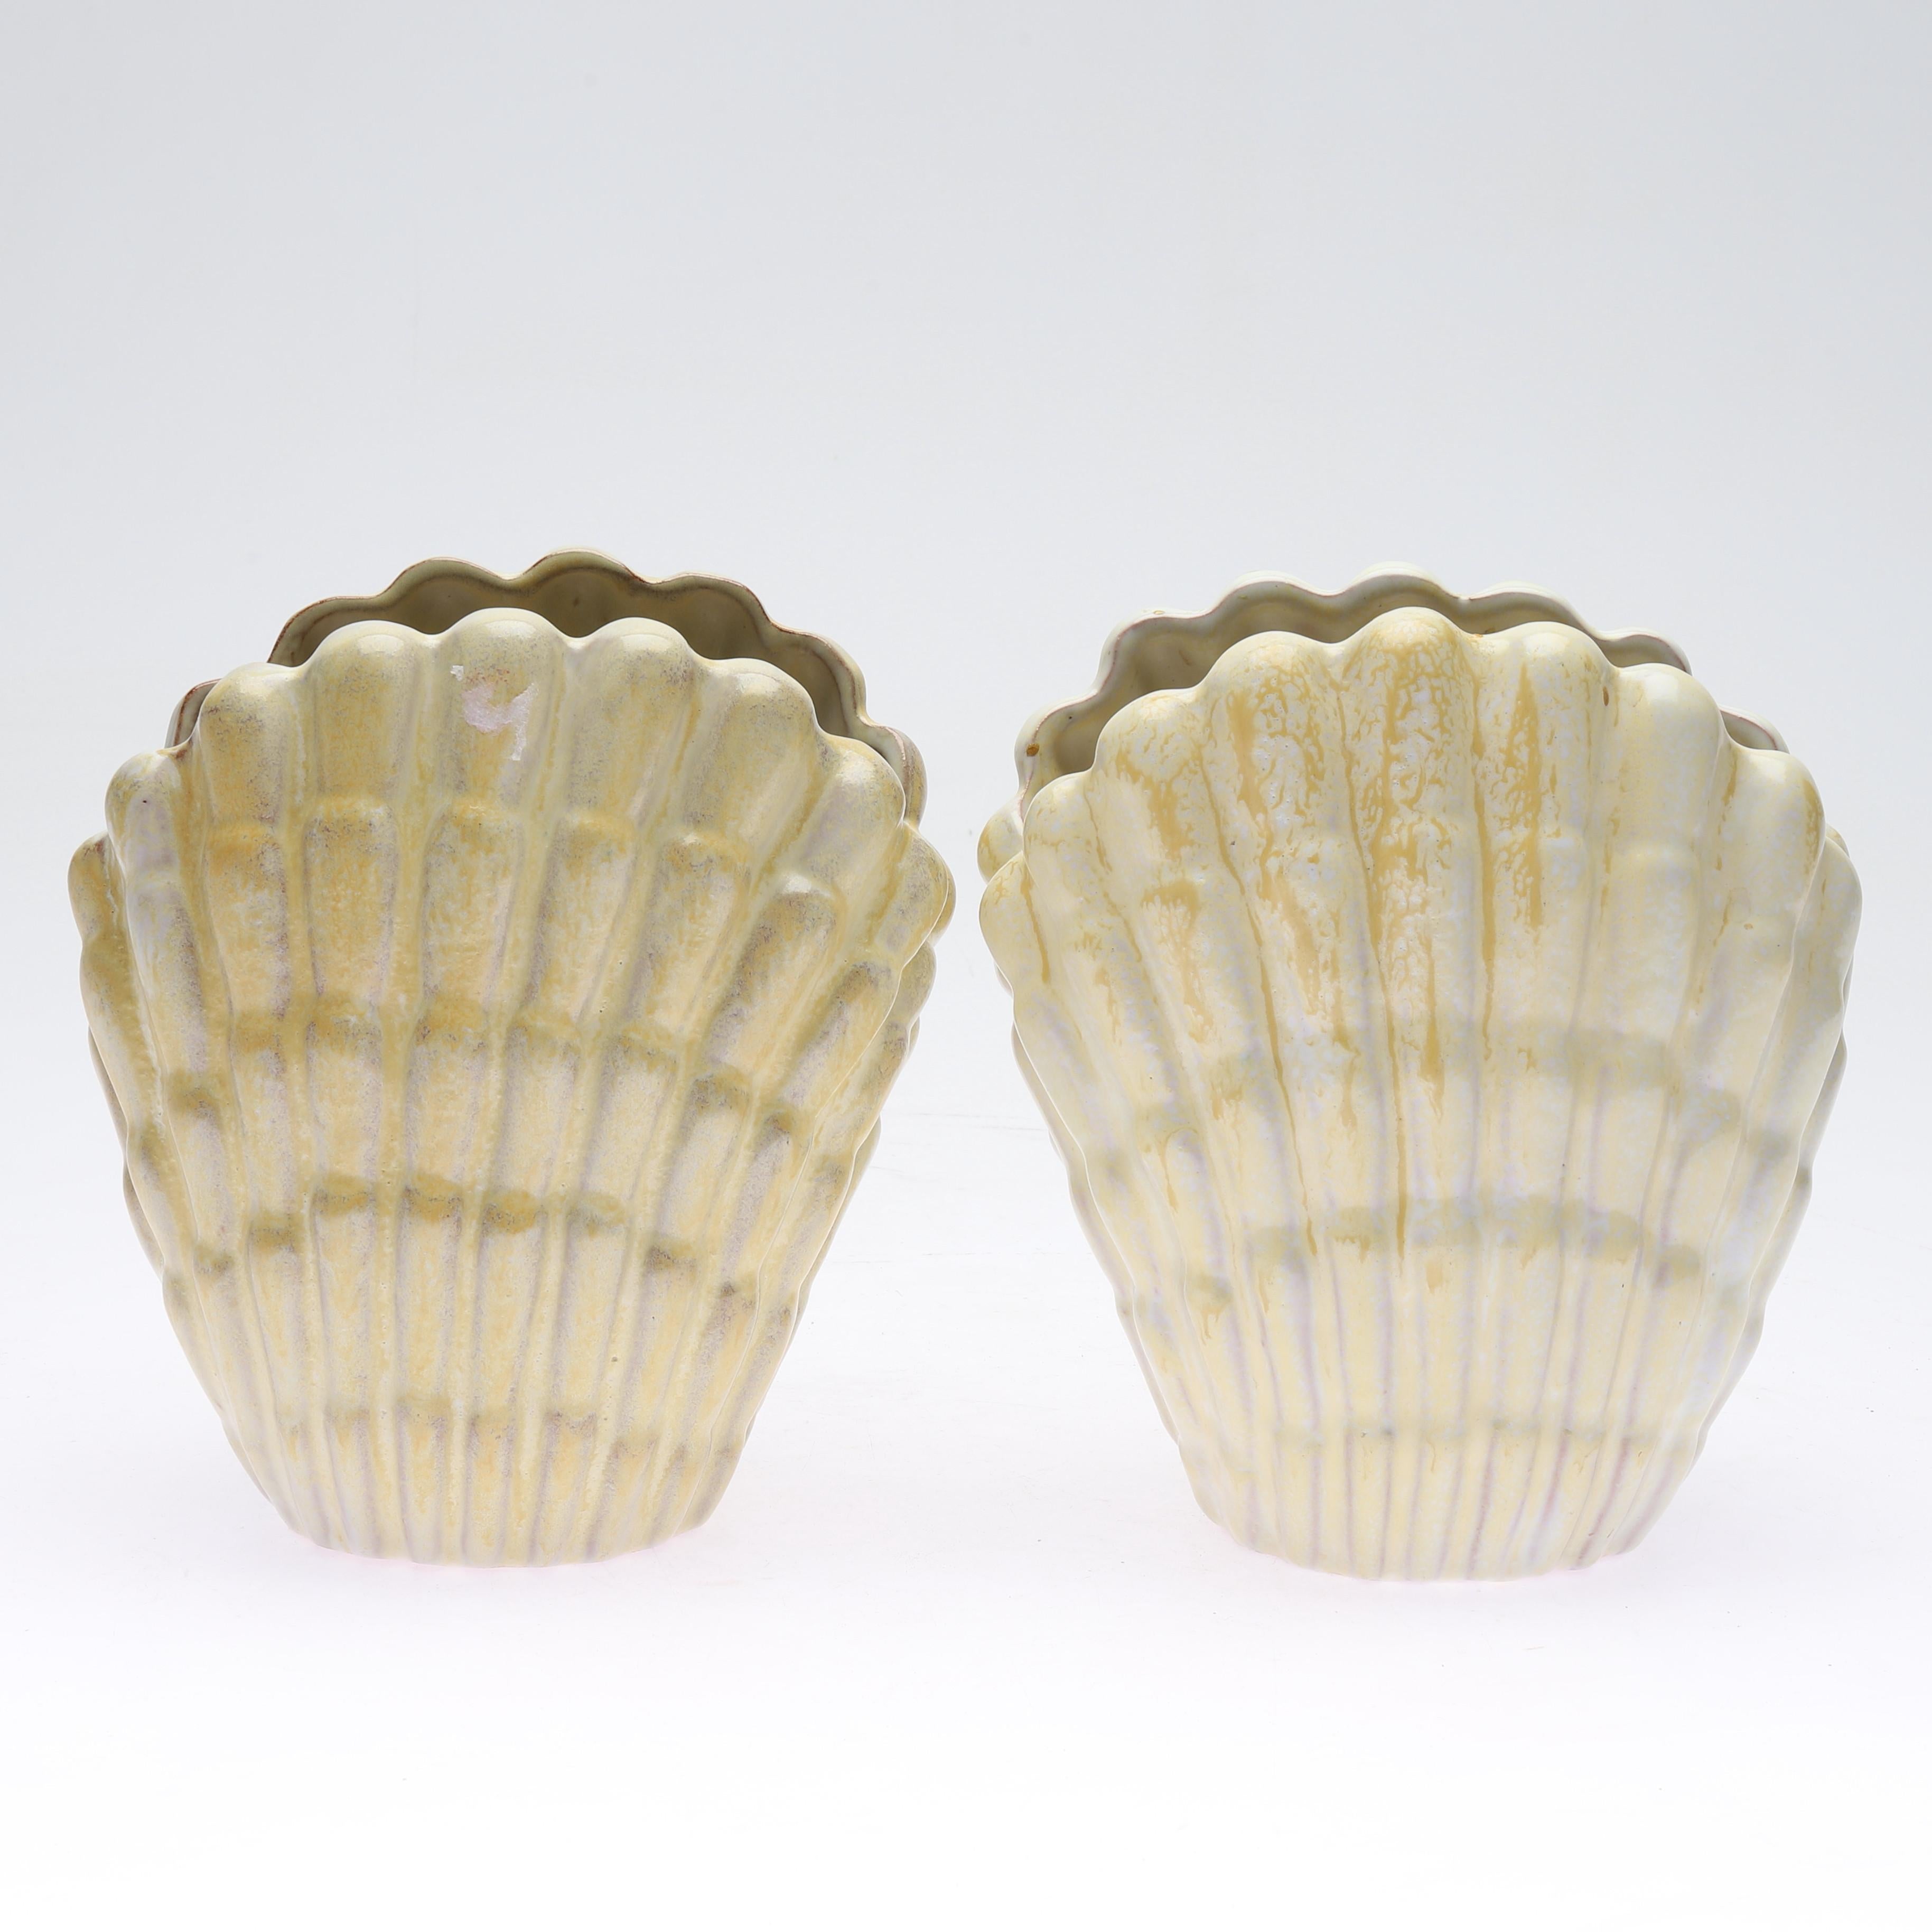 Shell vases designed by Vicke Lindstrand for Upsala Ekeby. Can be purchased separately as well!

Upsala-Ekeby AB was a porcelain, tile, brick, and glass company founded in 1886 in Uppsala, Sweden. Other designers of the period include Ettore